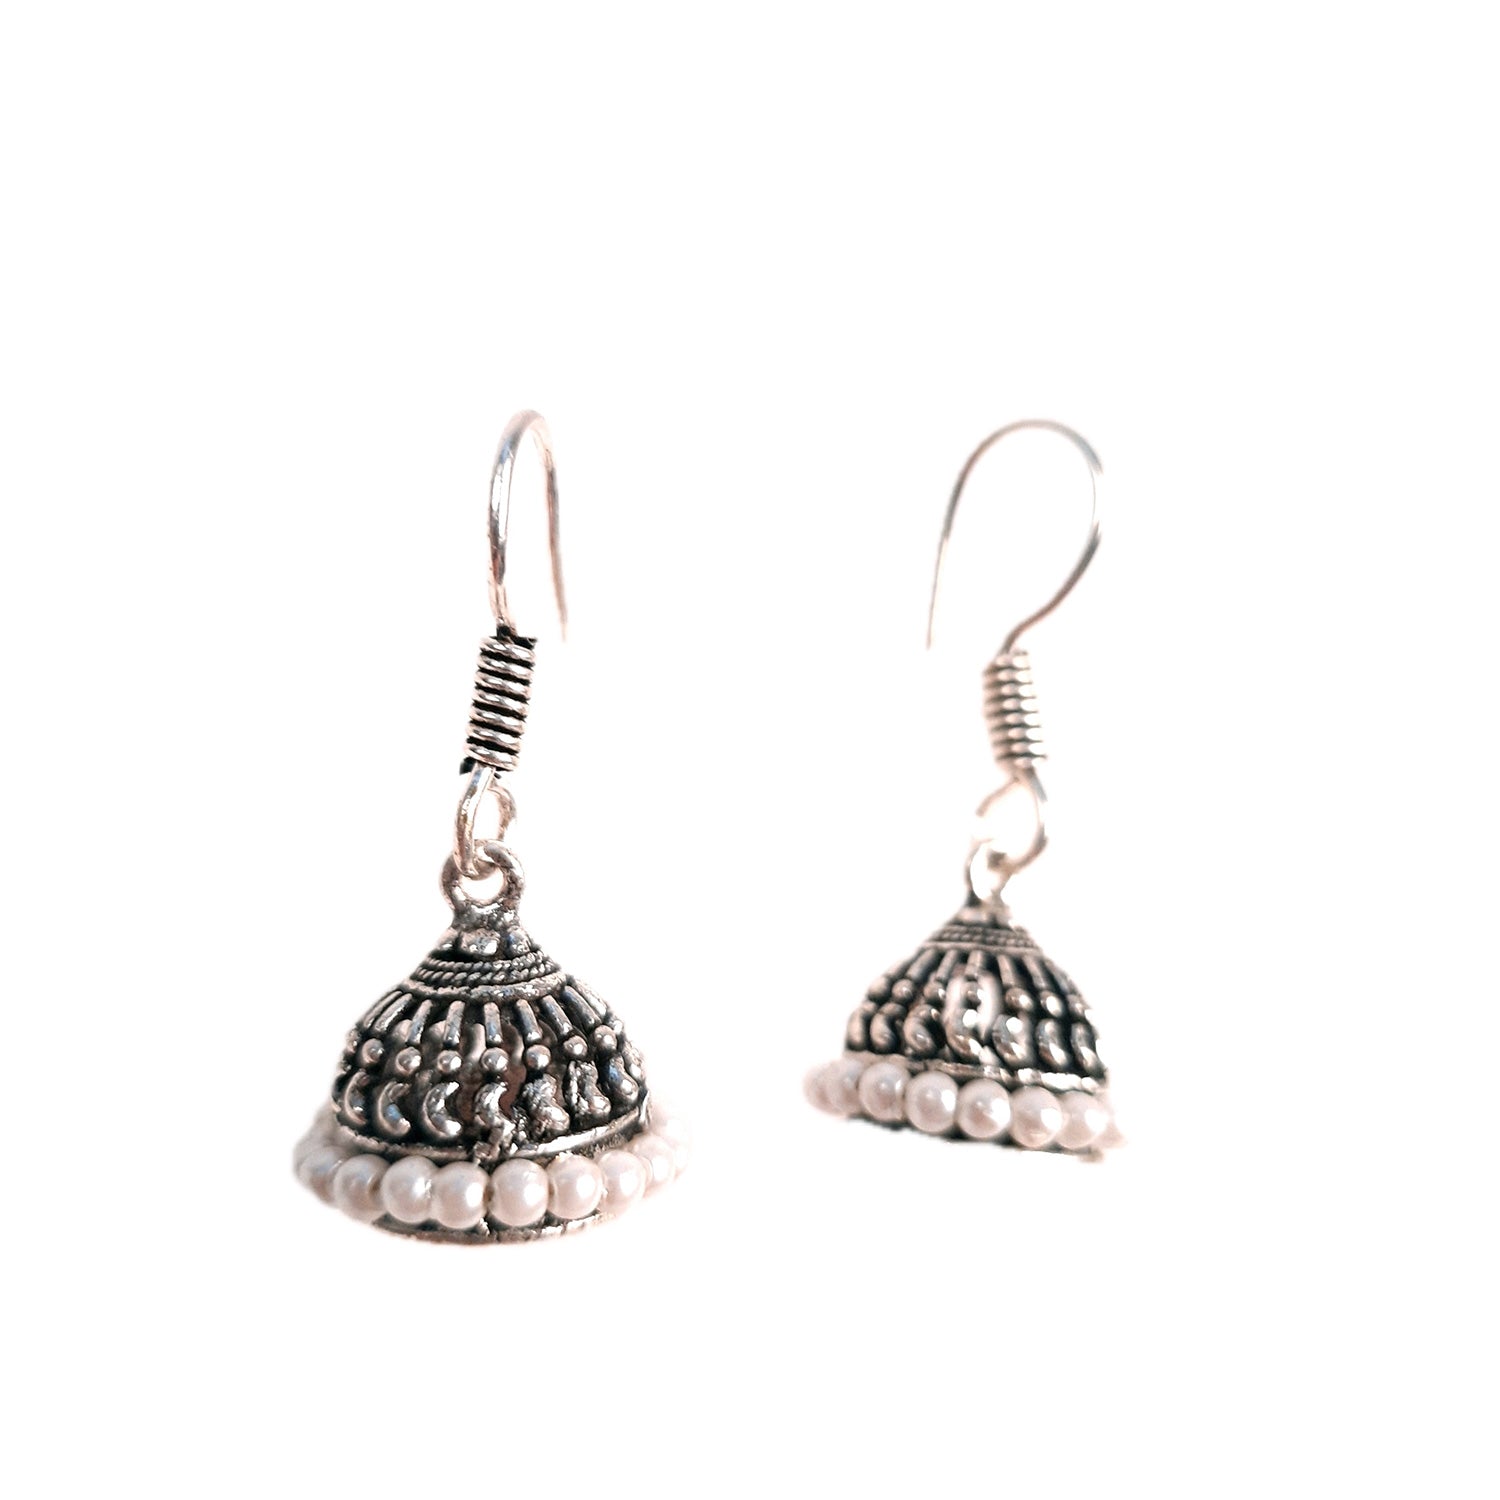 Oxidised Silver Plated Jhumka earrings for Girls and Women | Latest Stylish Fashion Jewellery | Gifts for Her, Friendship Day, Valentine's Day Gift -apkamart